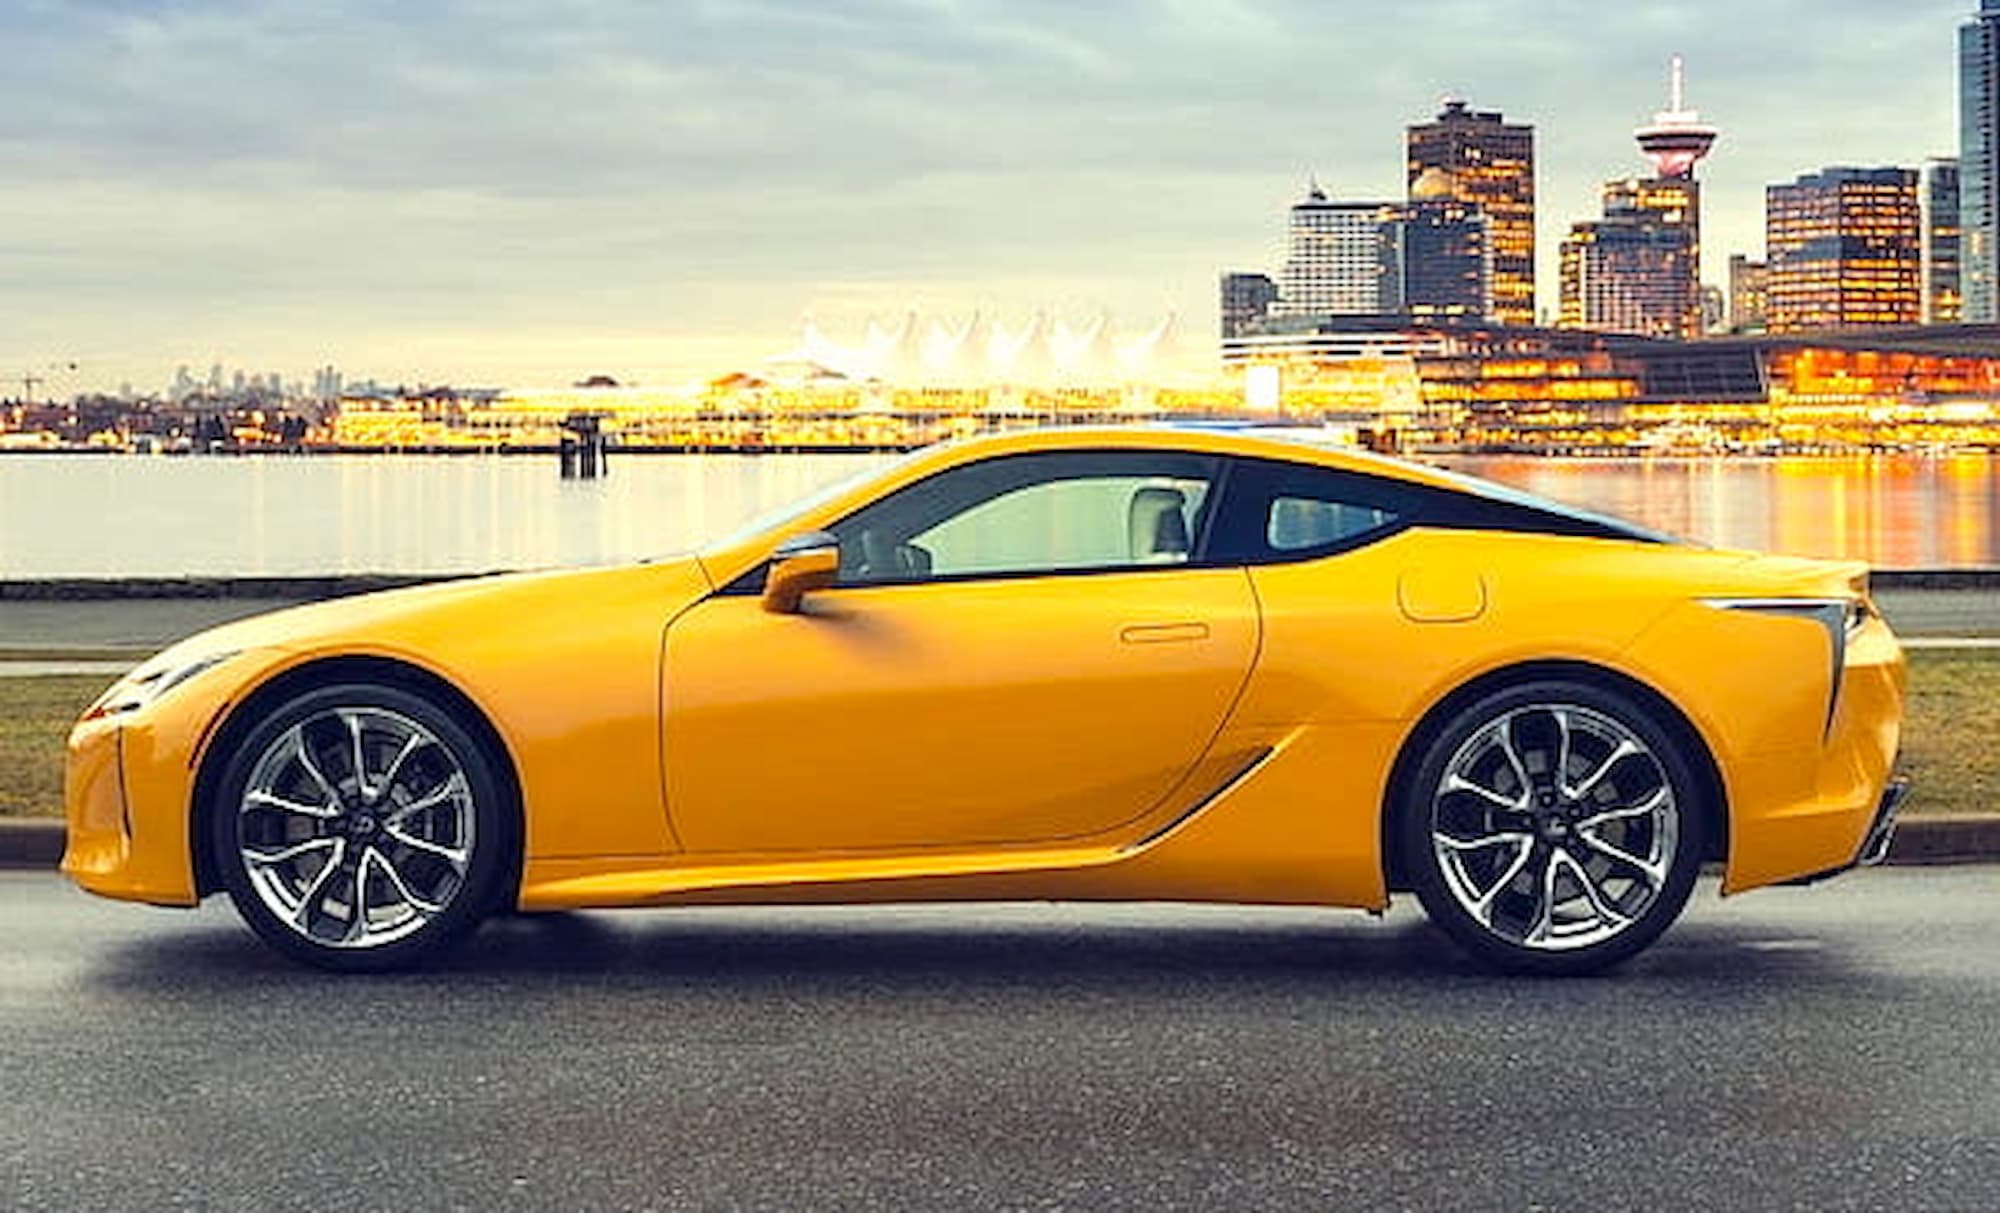 HD wallpaper lexus lc 500 2019 side view yellow sports coupe new yellow lc 500 japanese cars